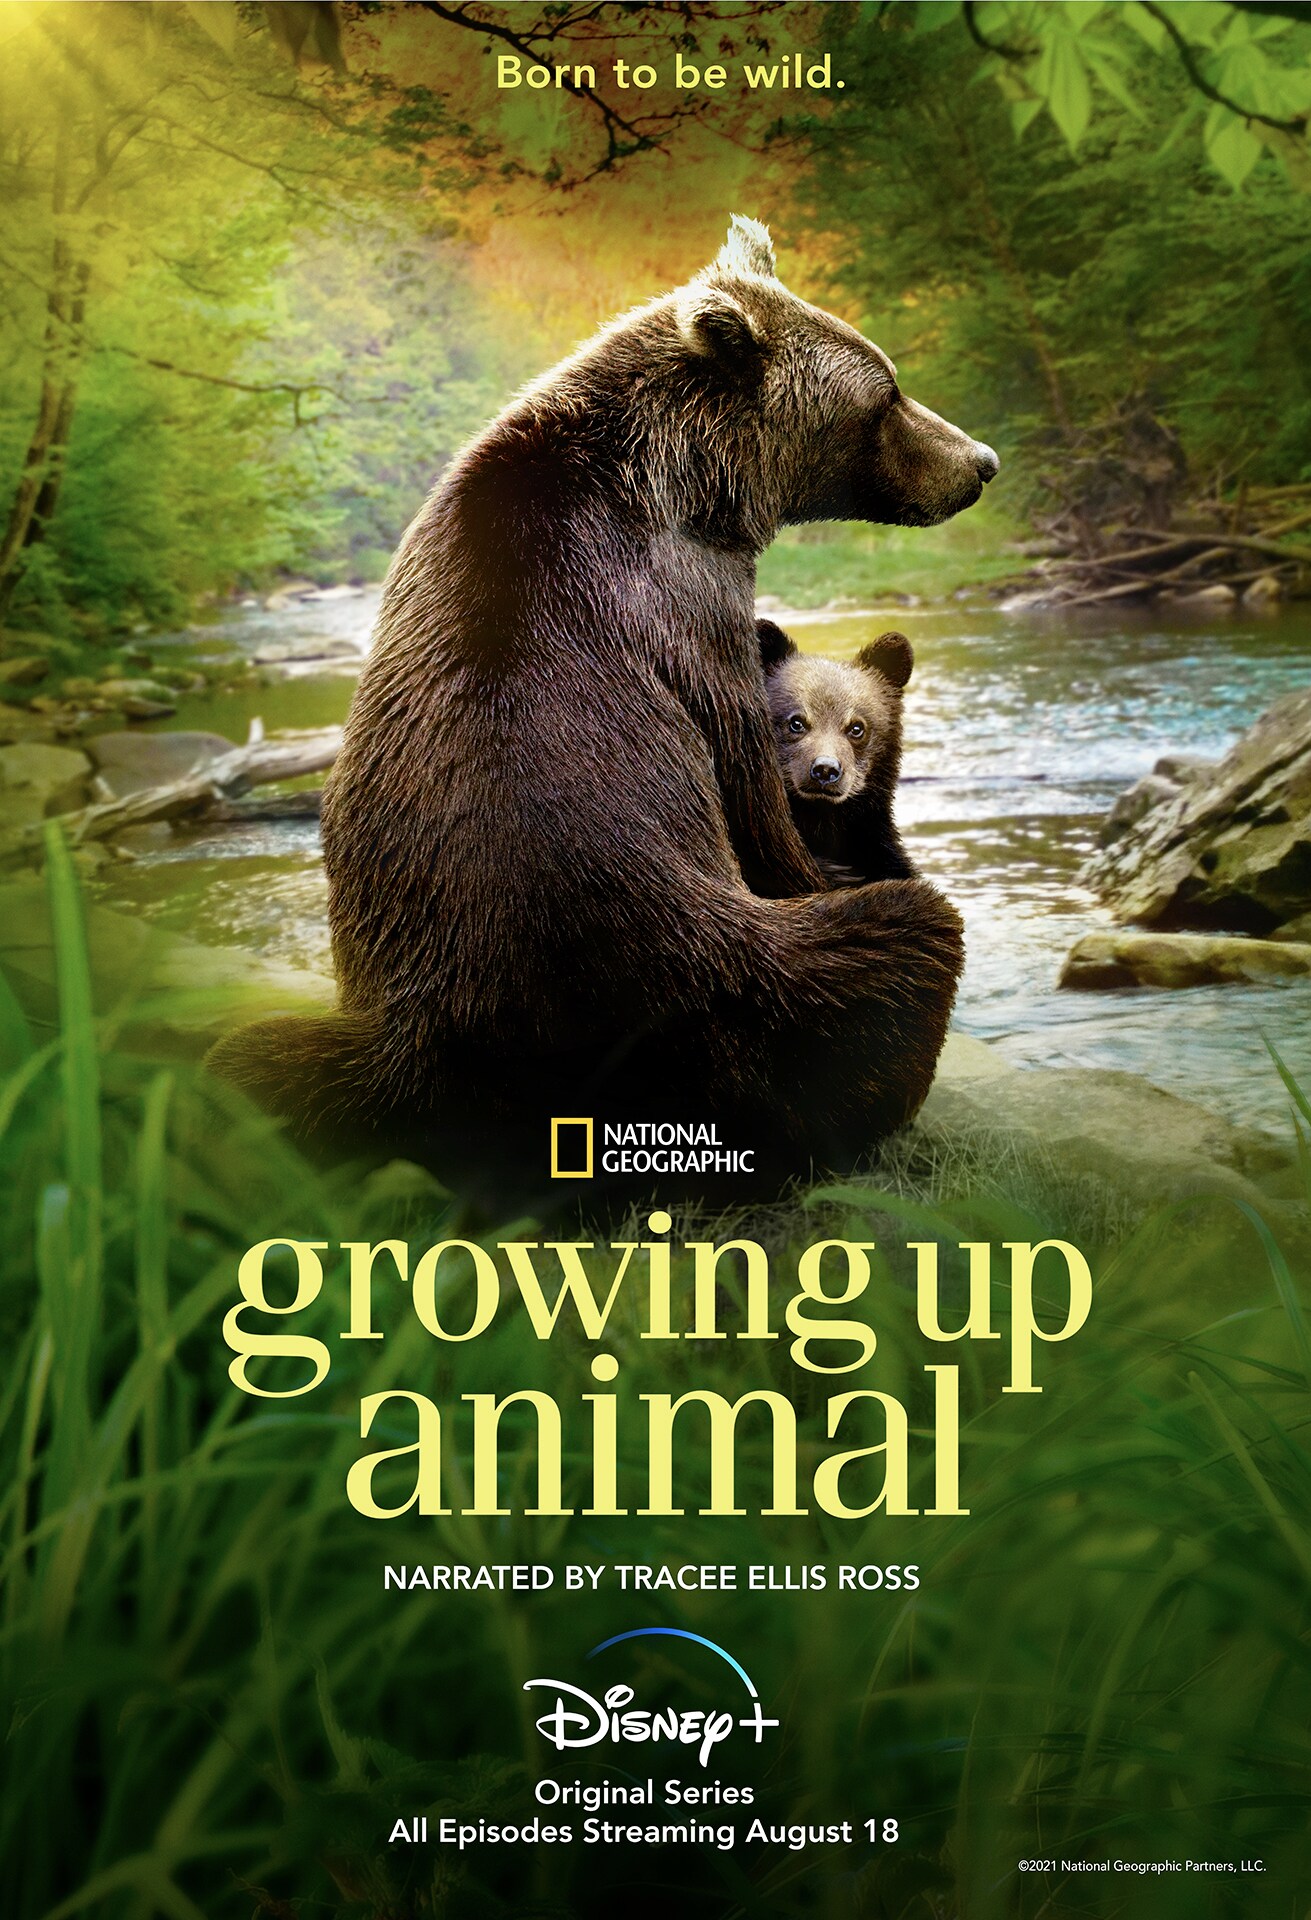 LOOK WHO'S EXPECTING! OFFICIAL TRAILER AND KEY ART FOR 'GROWING UP ANIMAL,'  THE NATIONAL GEOGRAPHIC ORIGINAL SERIES FOR DISNEY+, AVAILABLE NOW | UK  Press